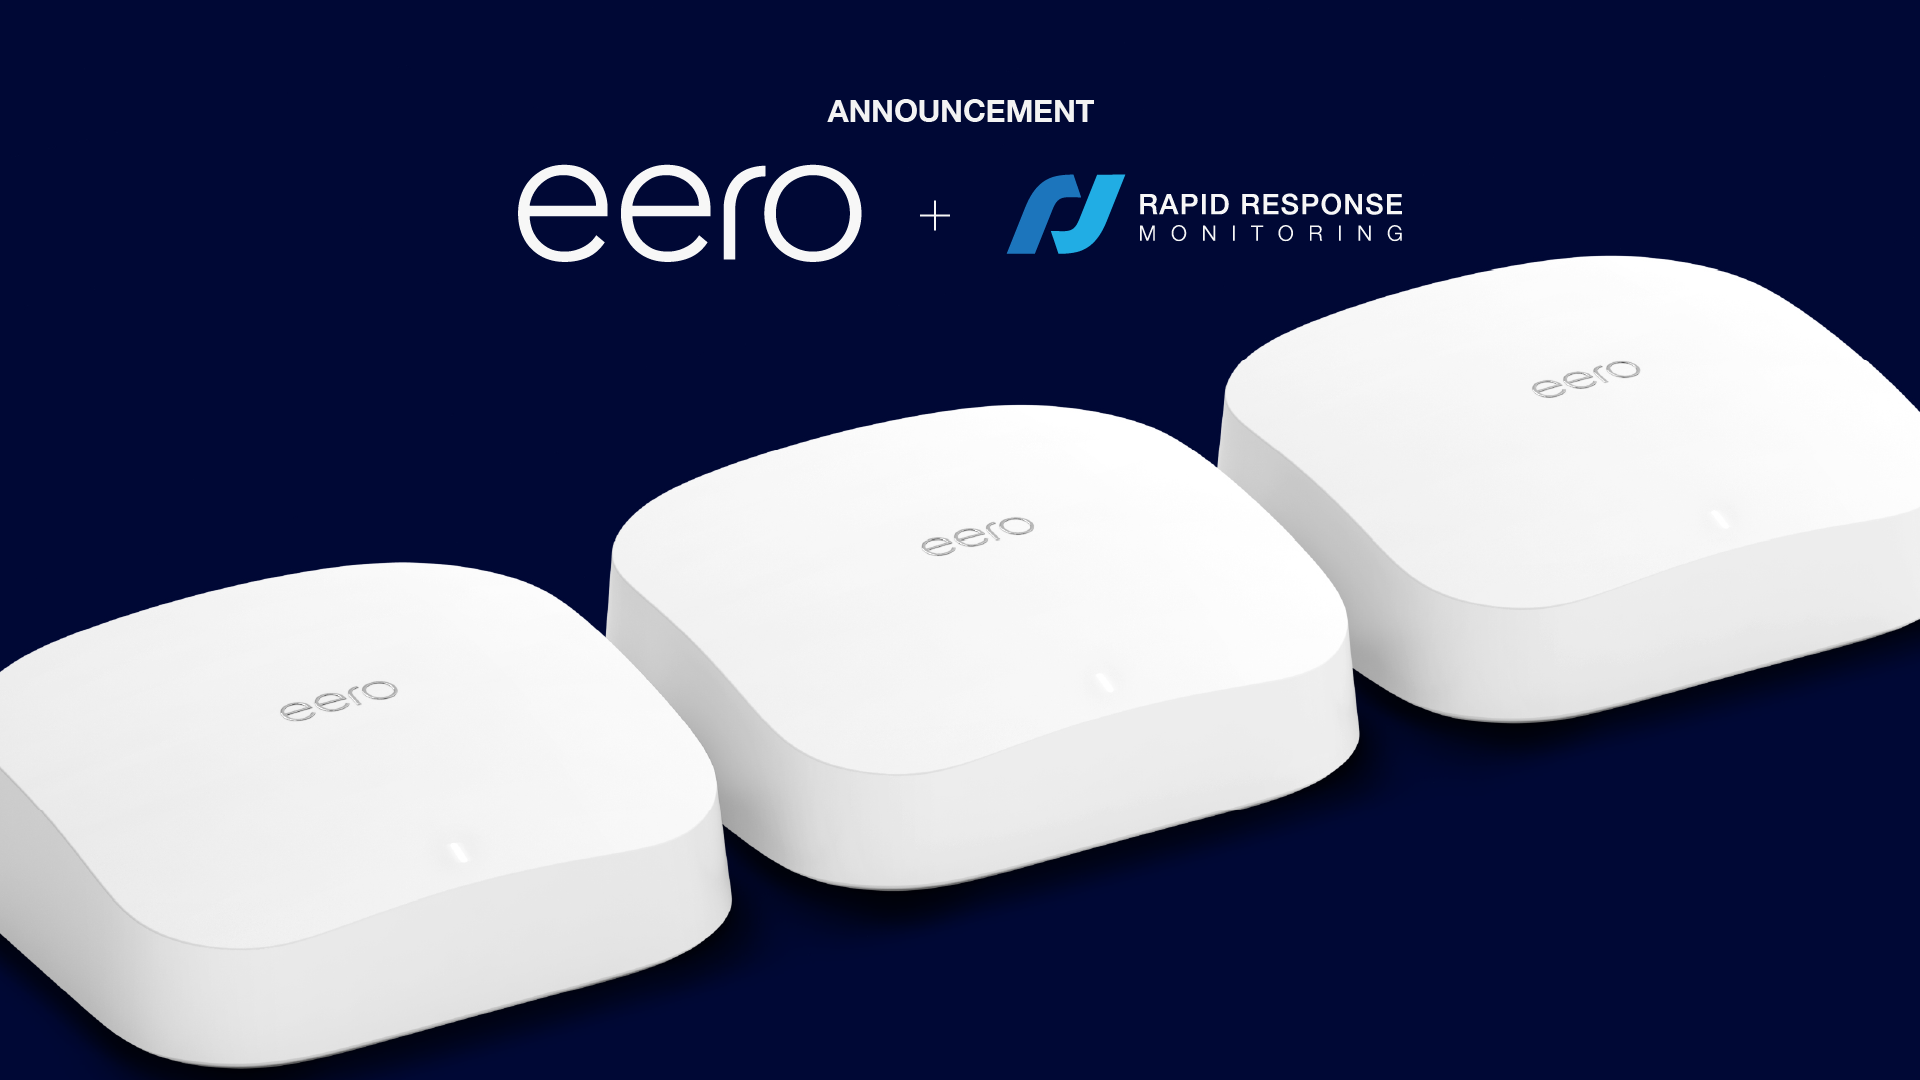 An image that says: Announcement eero + Rapid Response Monitoring.